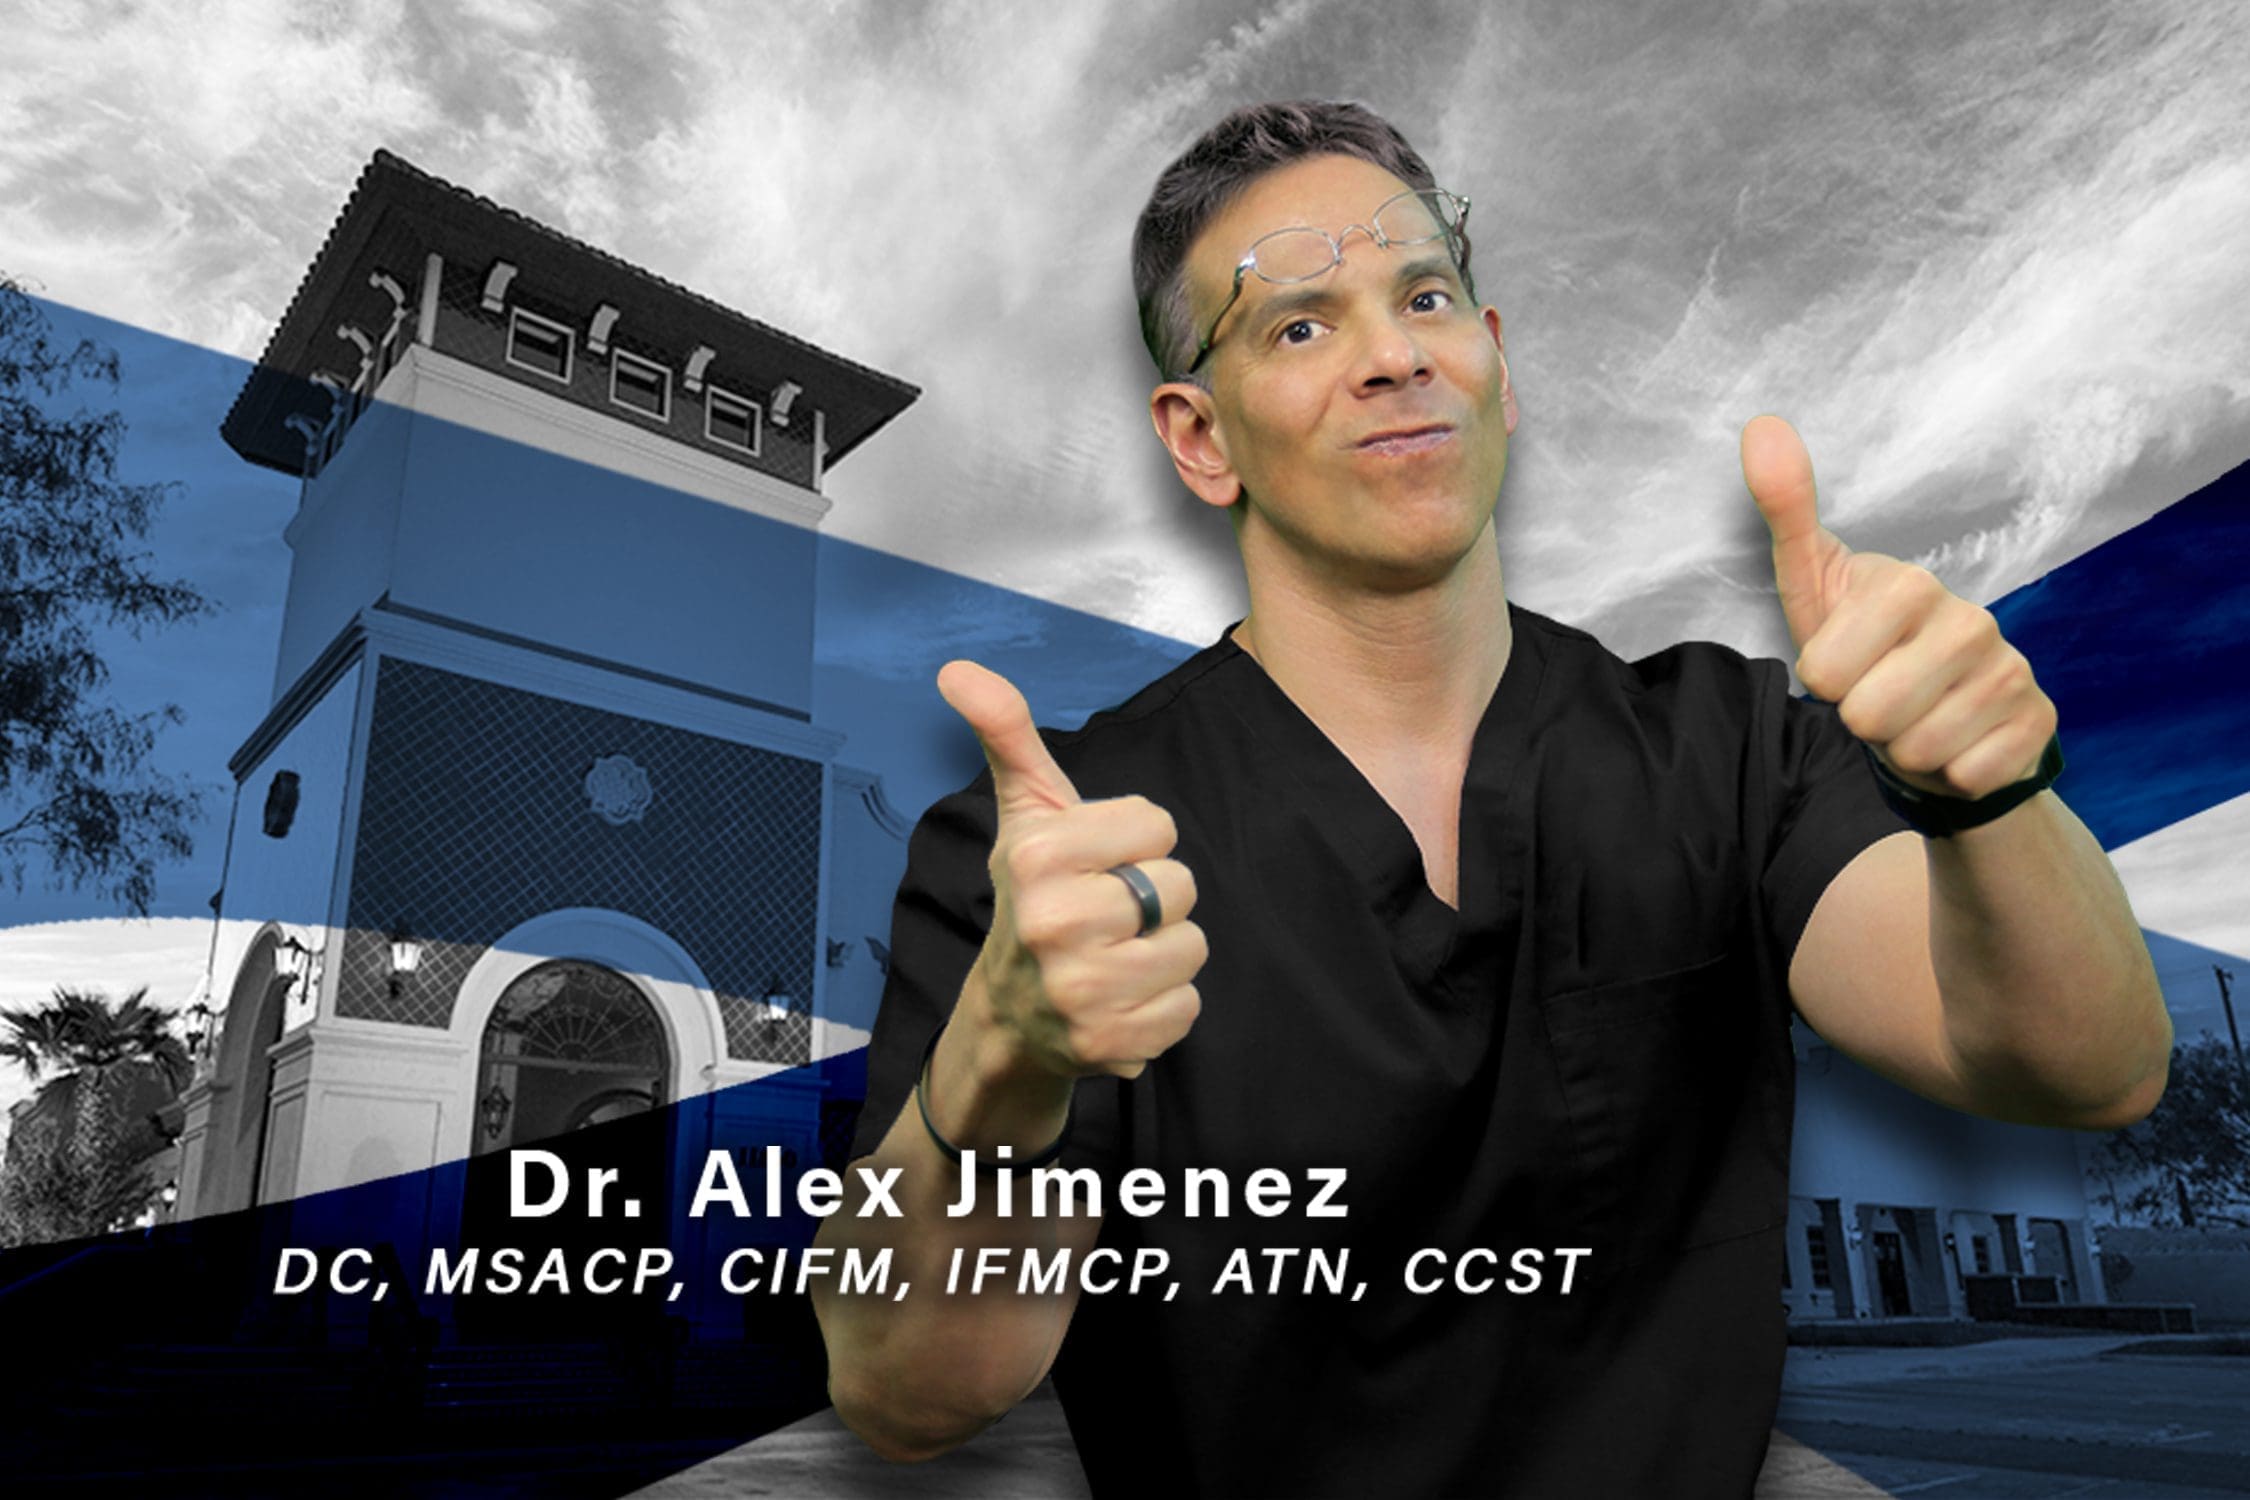 Image of Dr. Alex Jimenez with thumbs up standing in front of his office clinic.